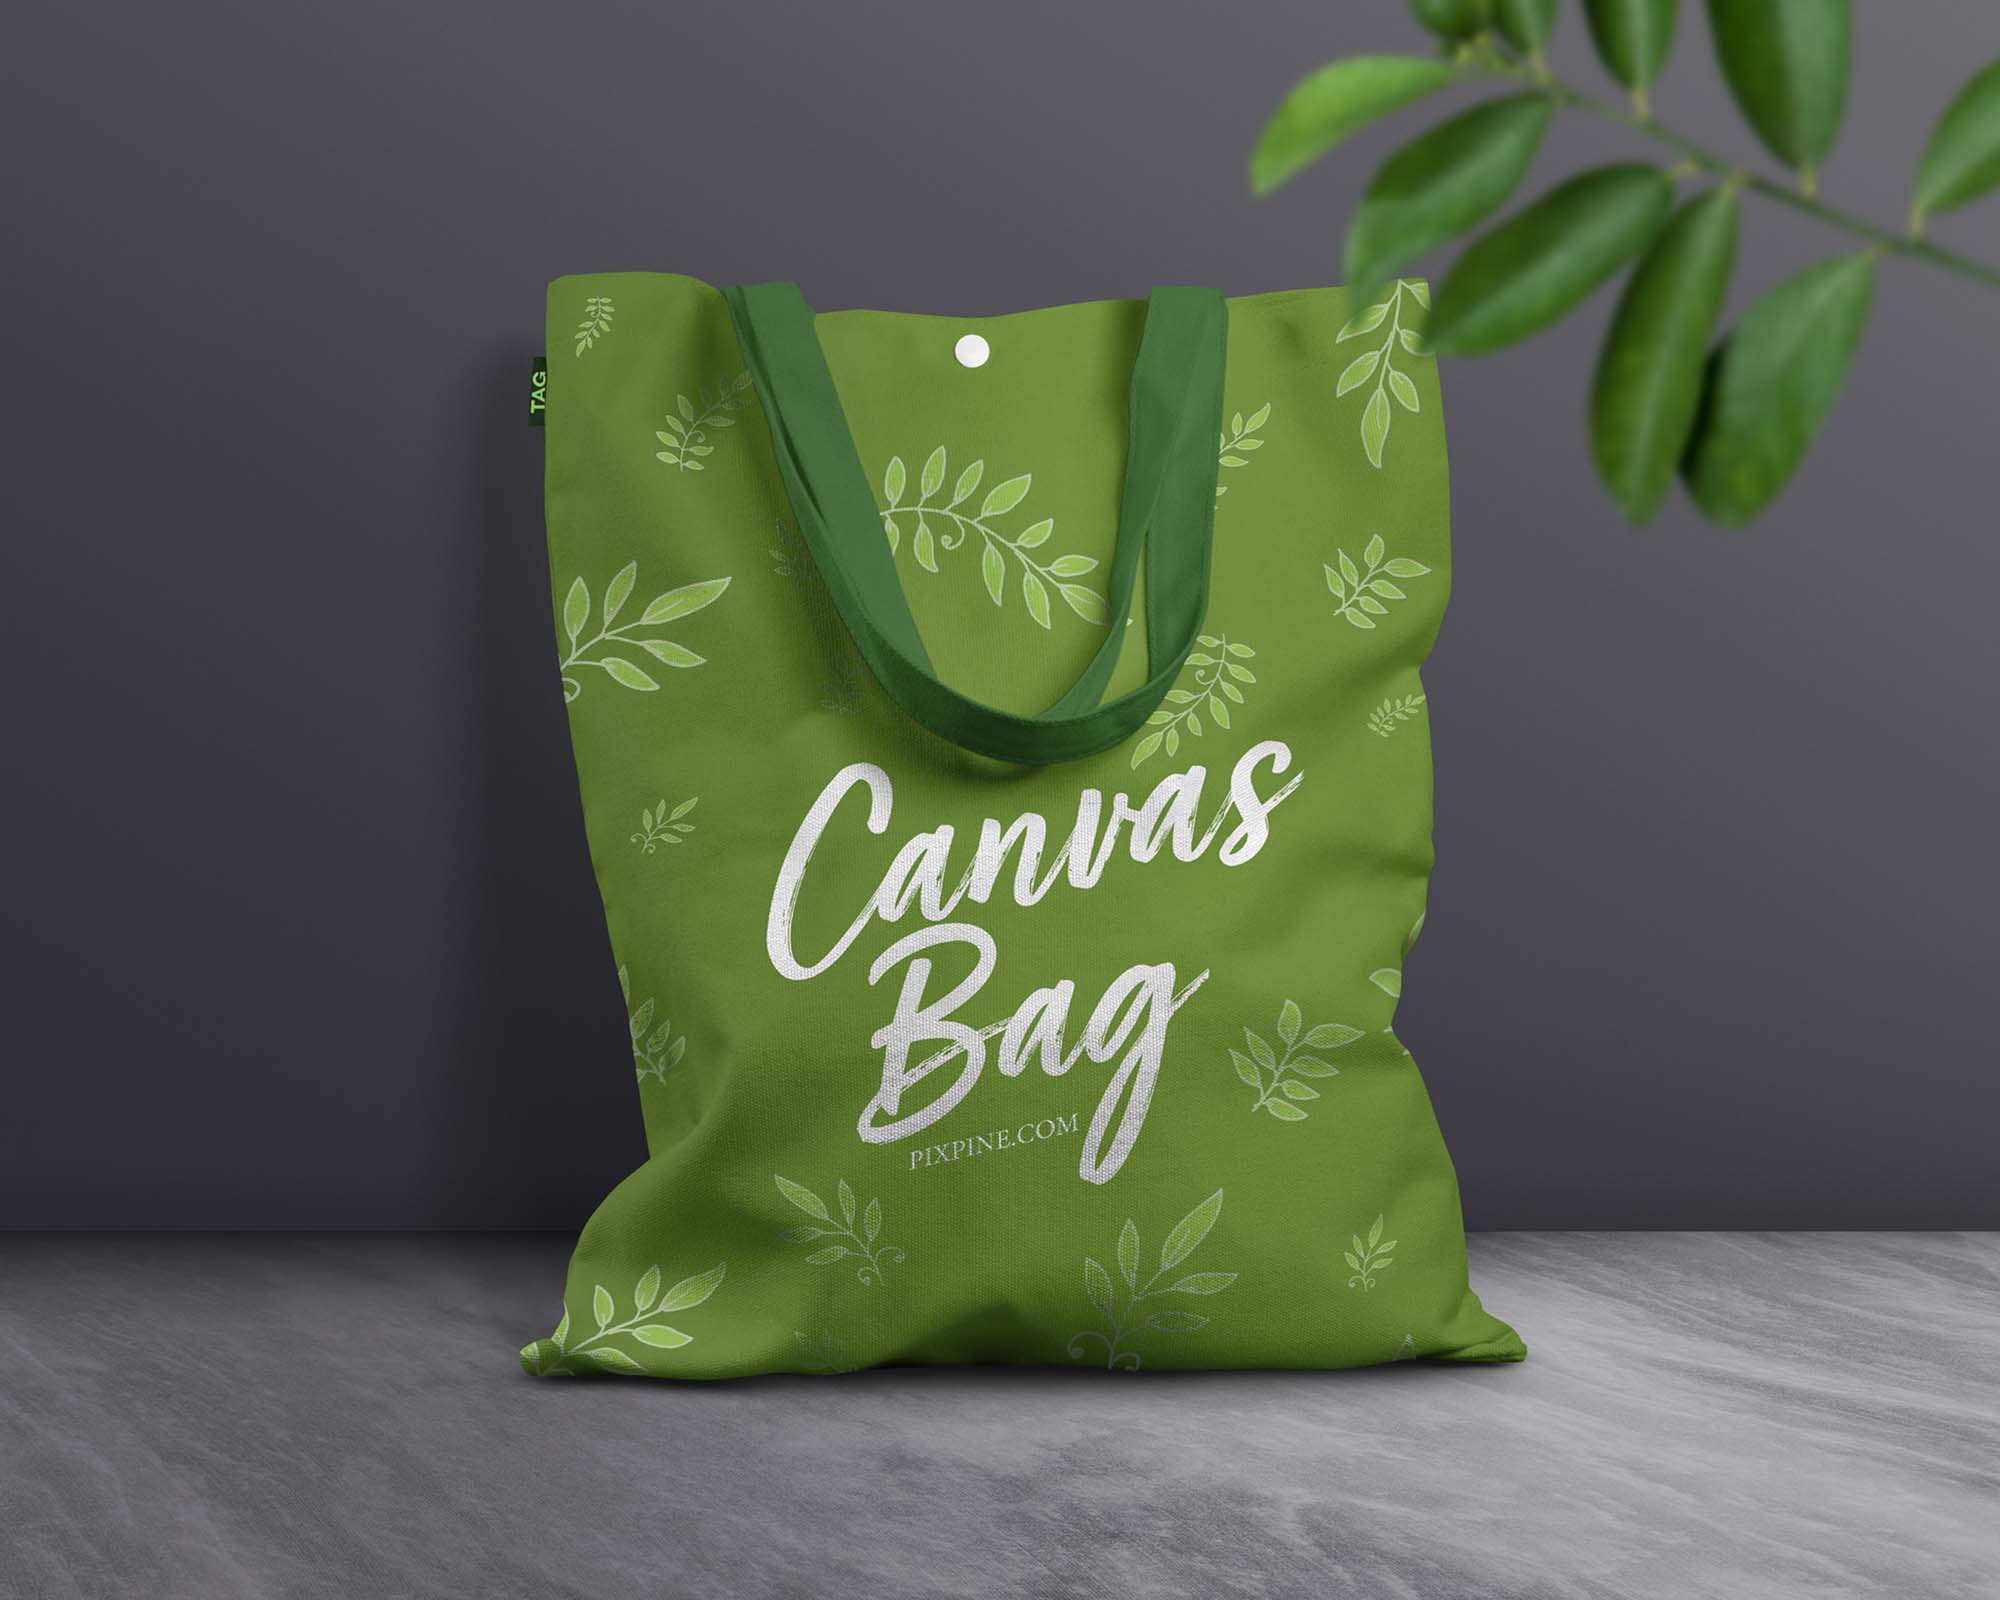 Download Eco Canvas Bag PSD Mockup (Free) by Pixpine